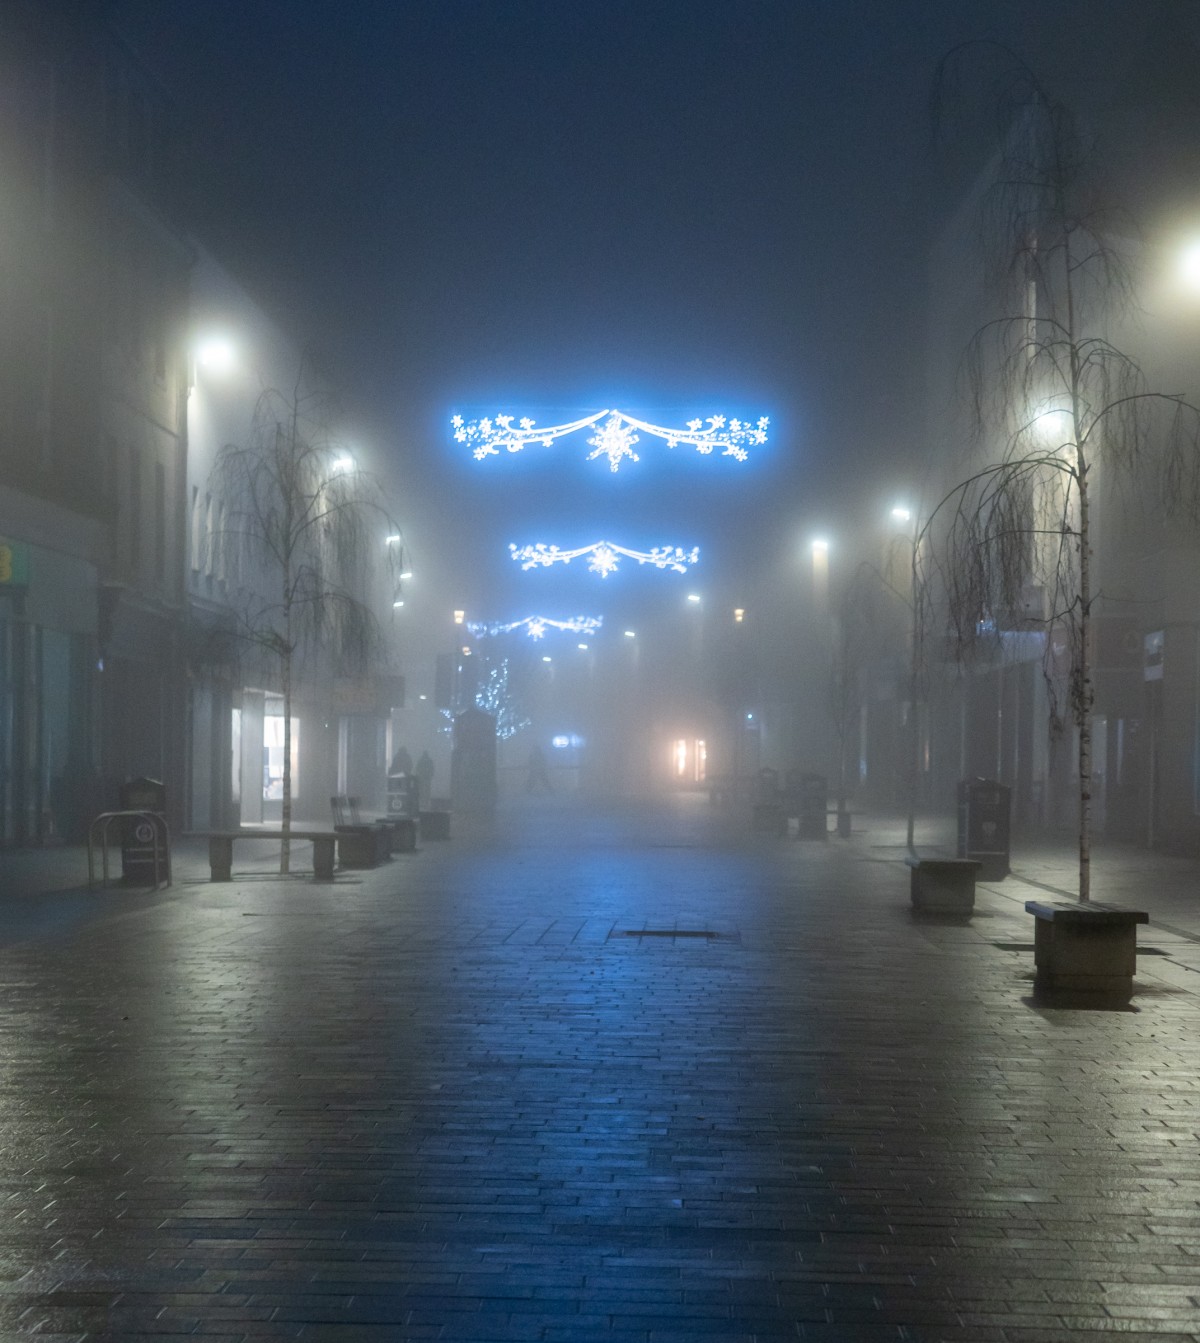 Perth High Street looks almost alien in this stunning fog filled photograph.